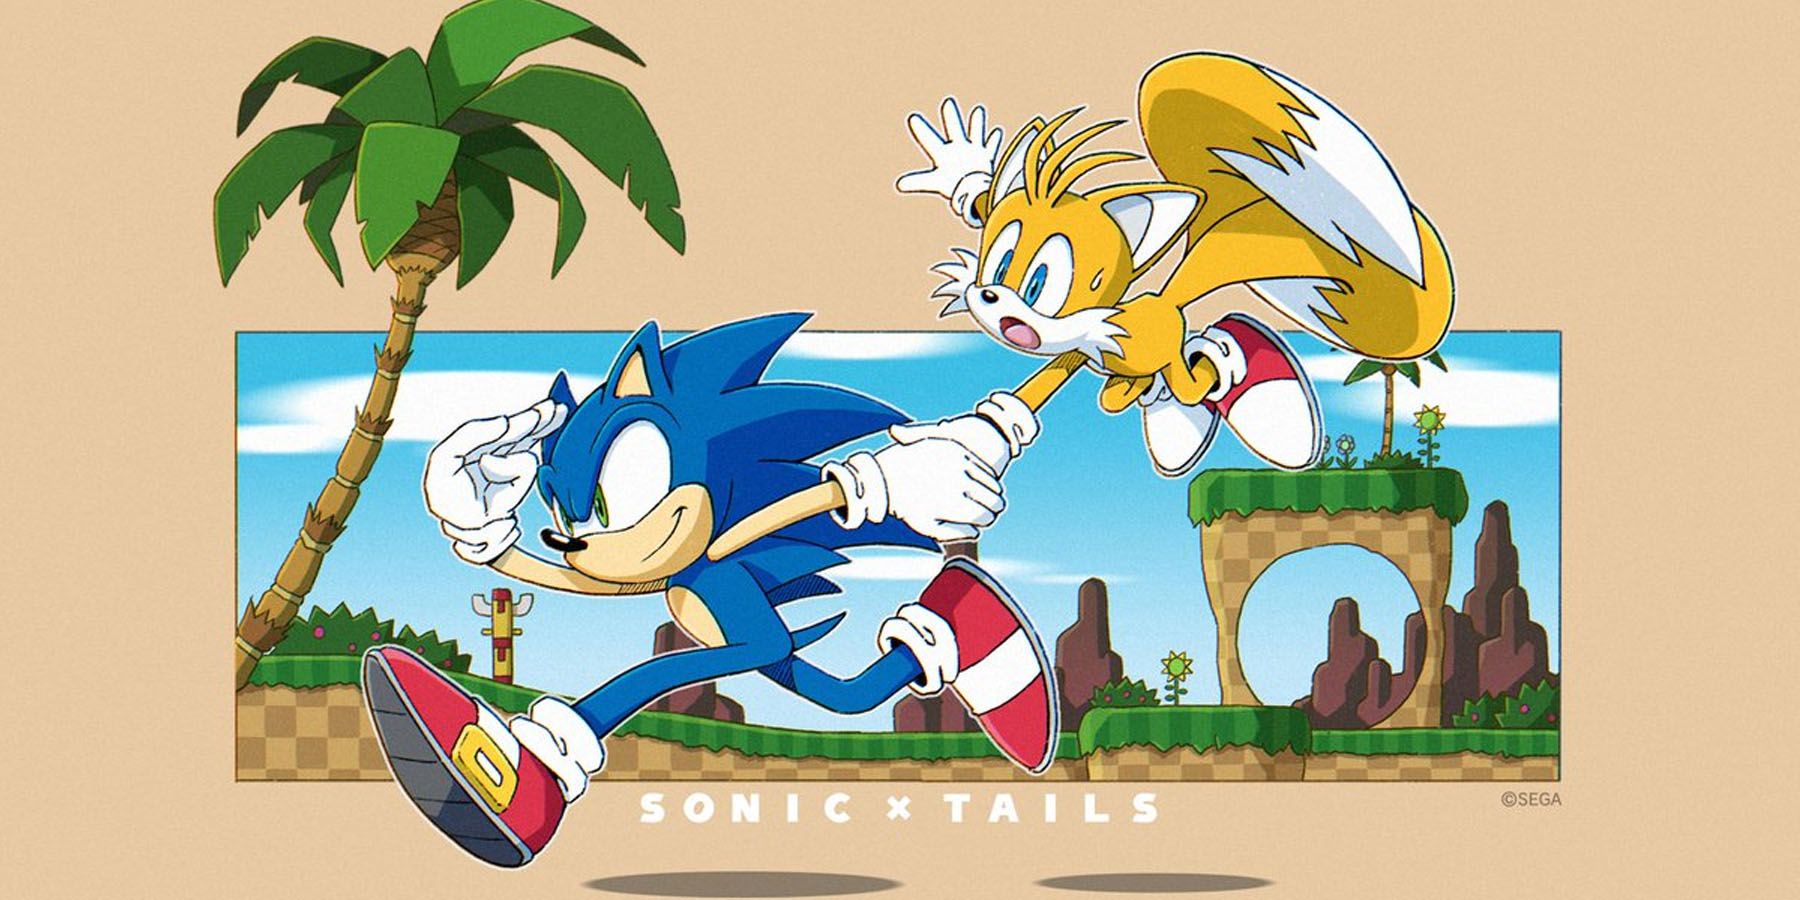 Sonic and Tails Sonic Channel Official Art